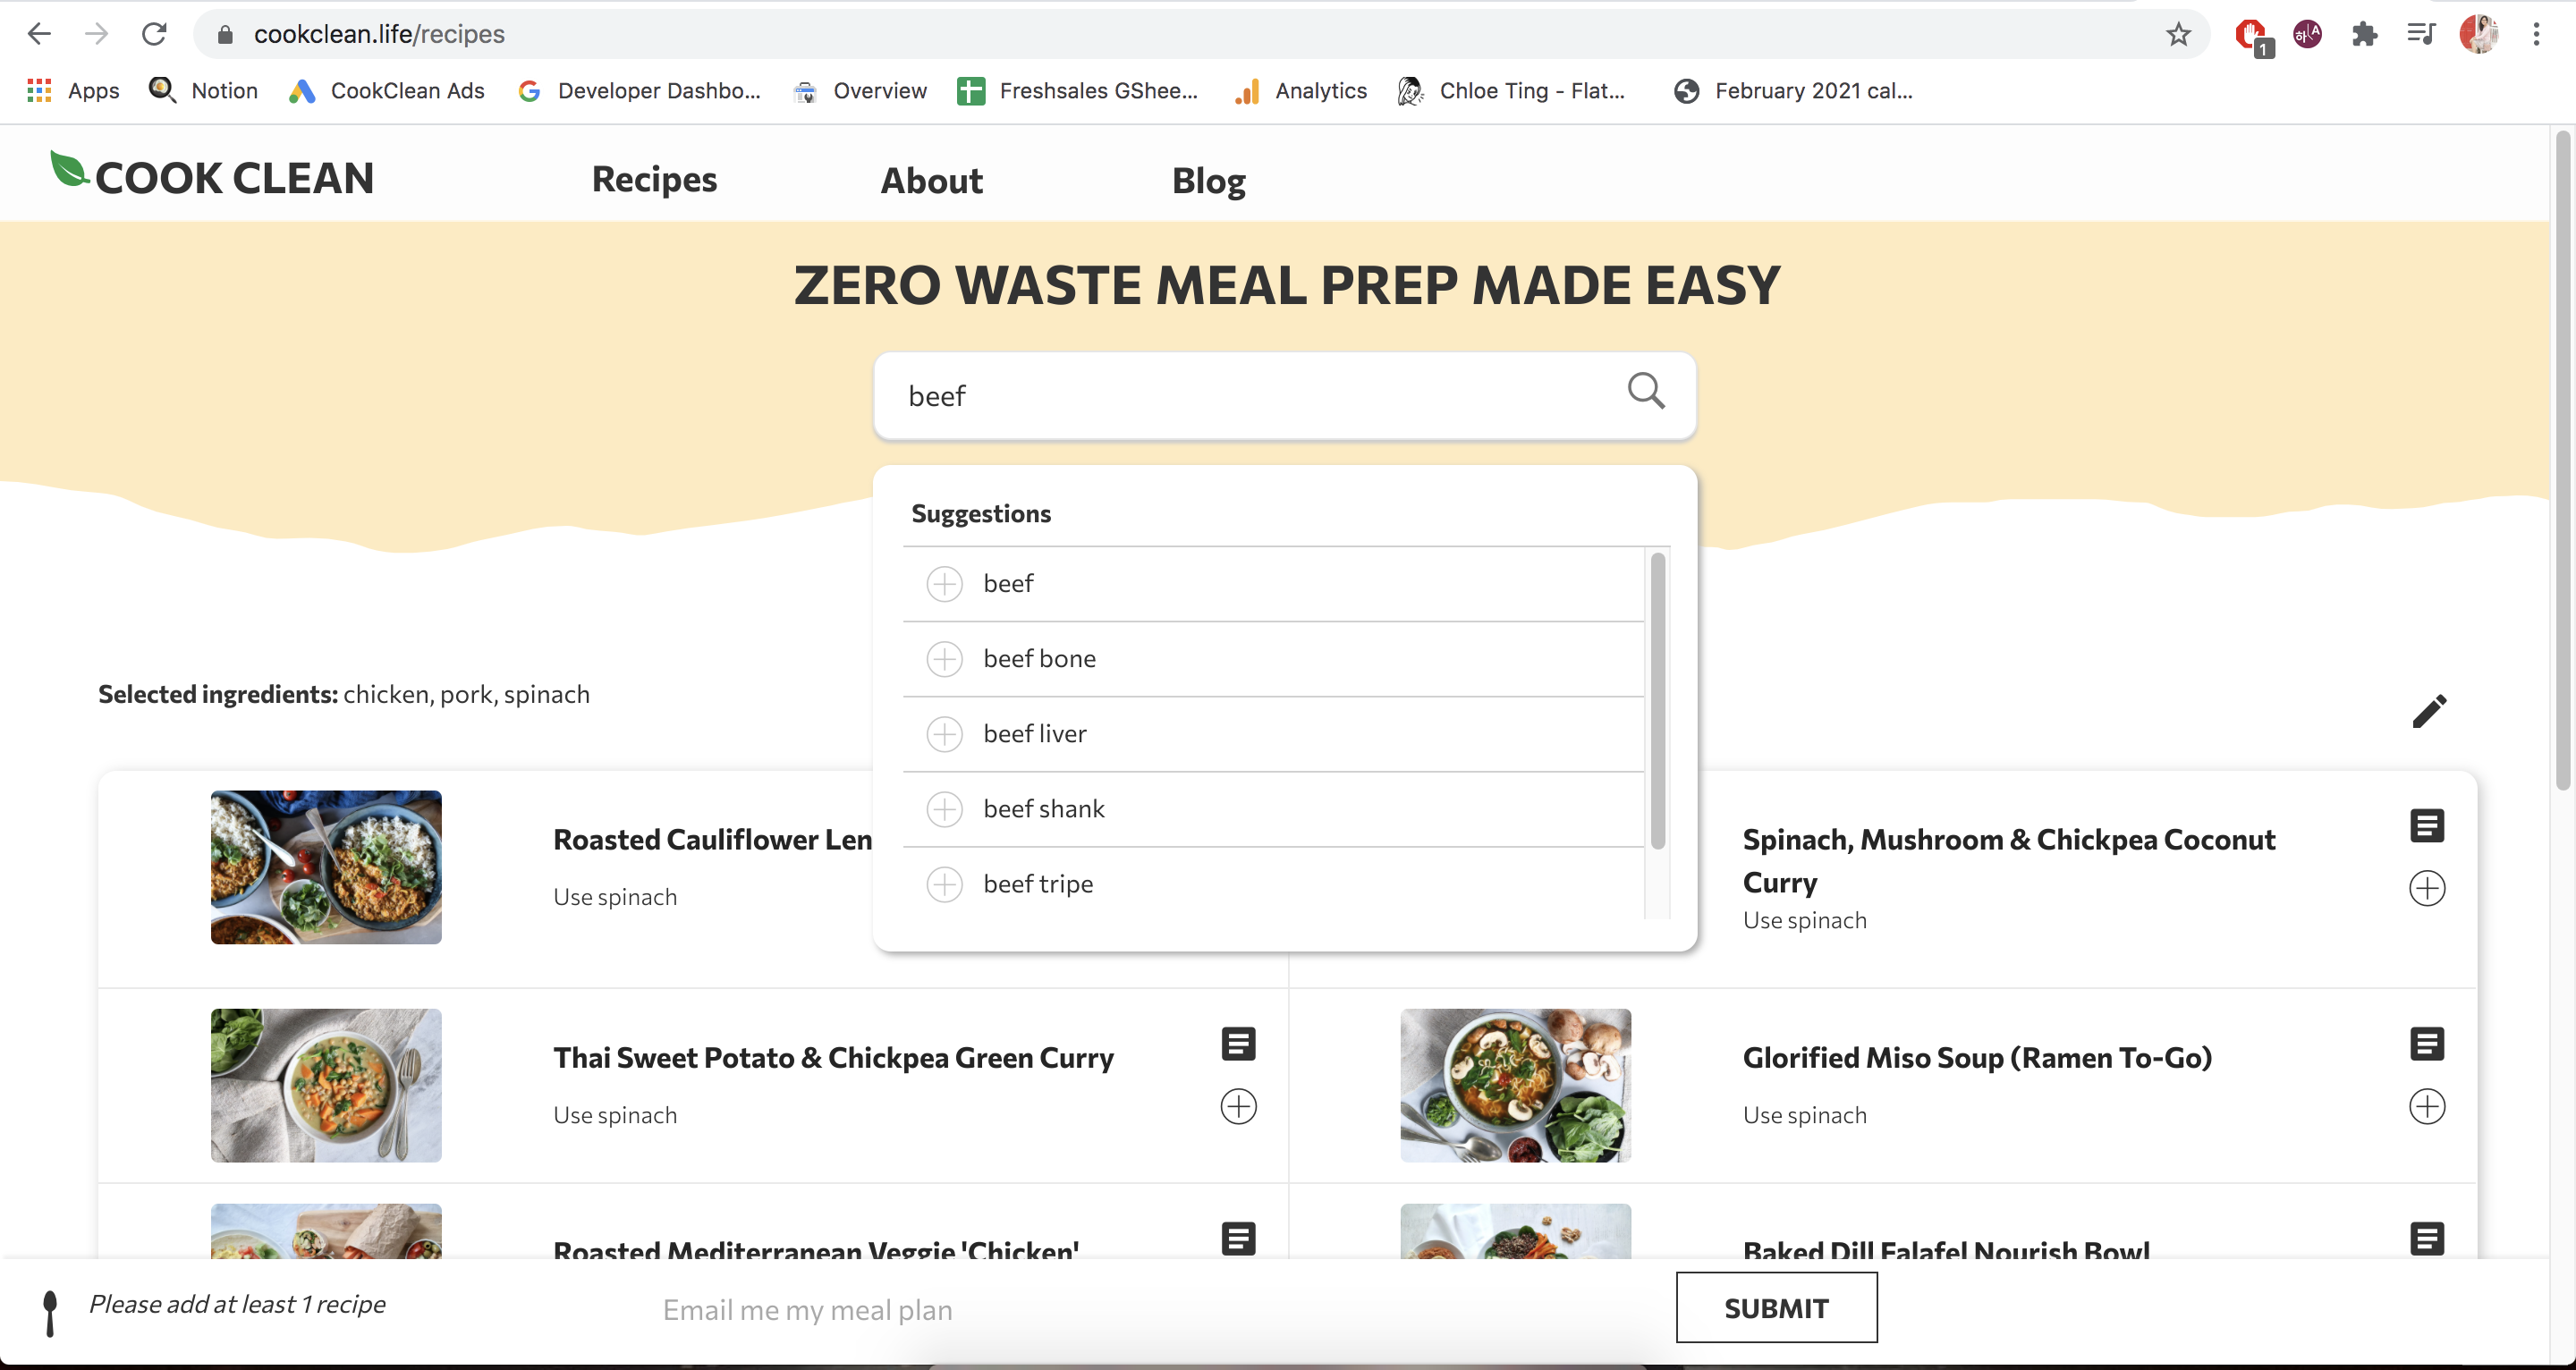 Recipes page: Find recipes by adding / removing ingredients